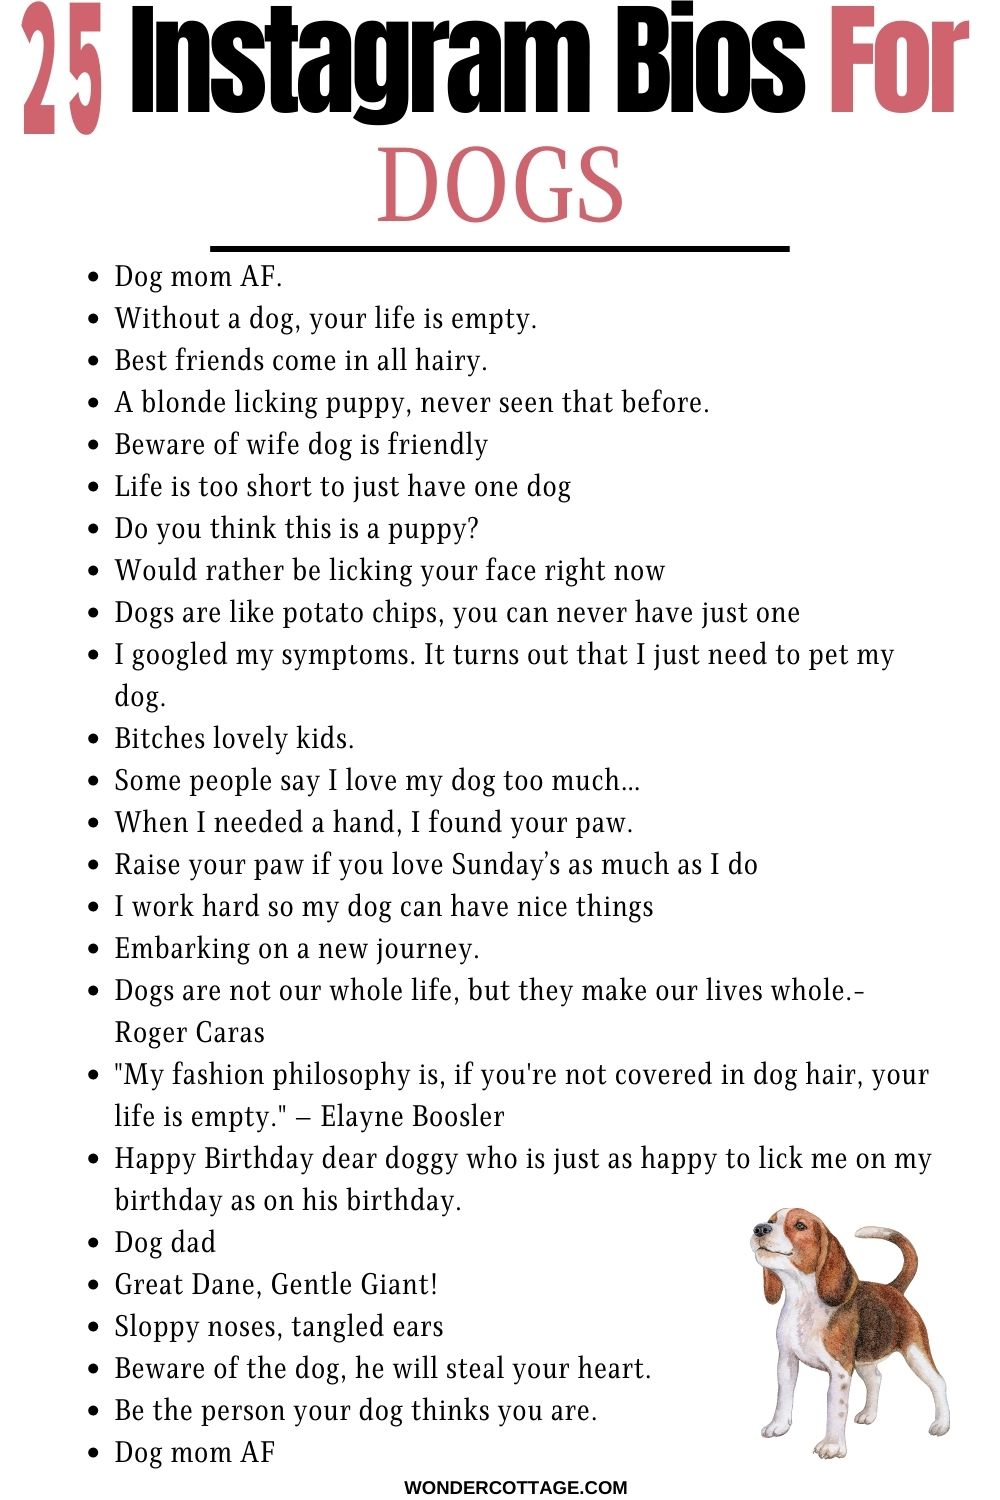 Instagram Bios For Dogs